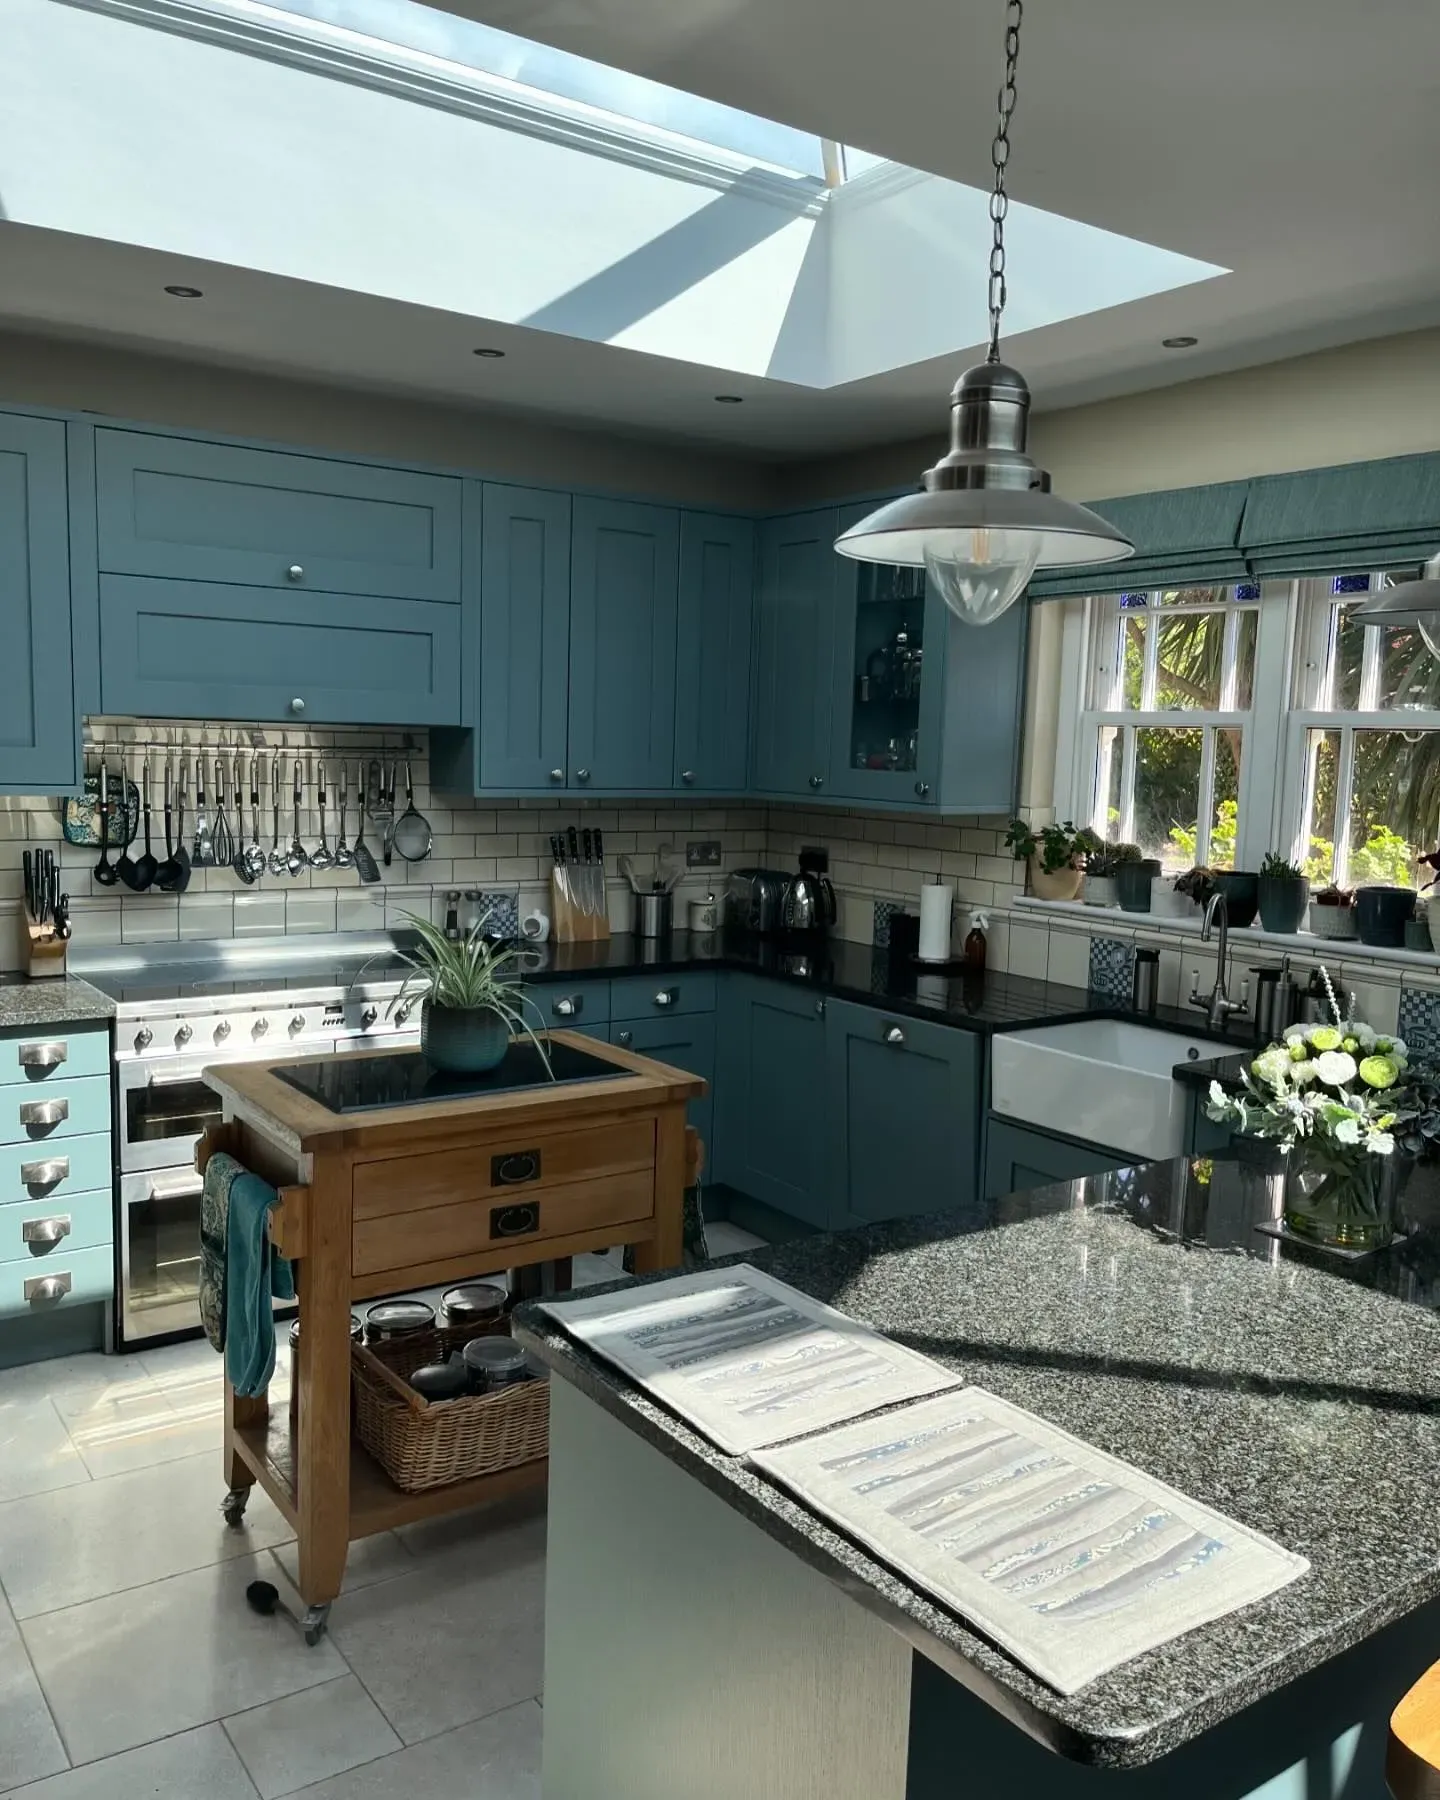 Oval Room Blue dusted kitchen cabinets